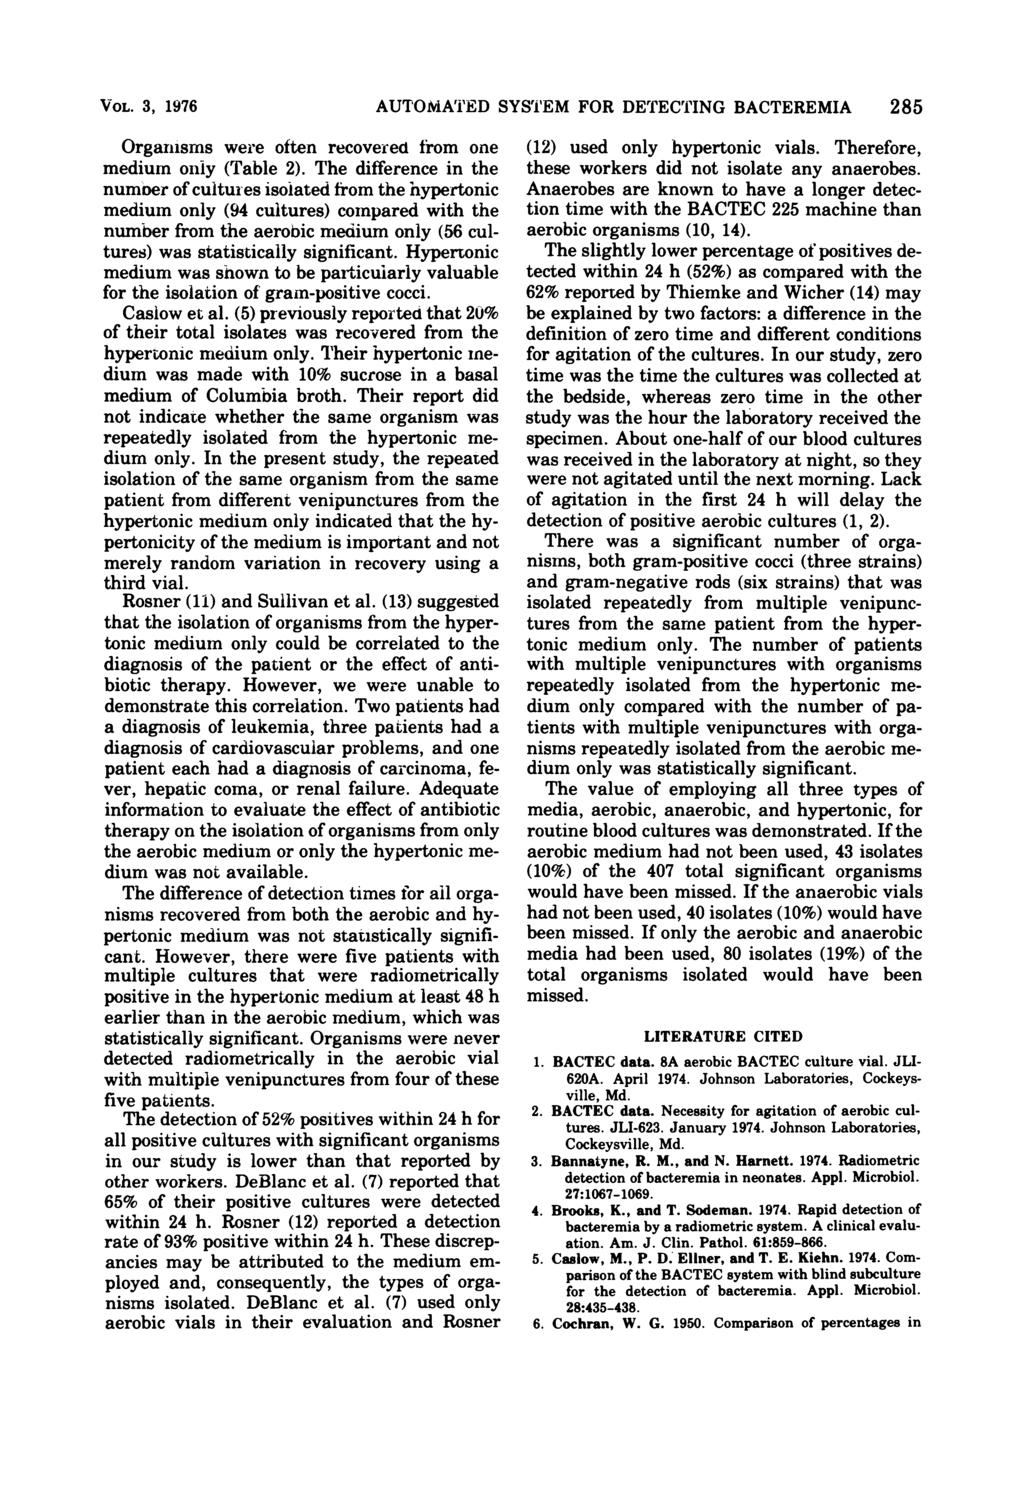 VOL. 3, 1976 Organisms were often recovered from one medium only (Table 2).